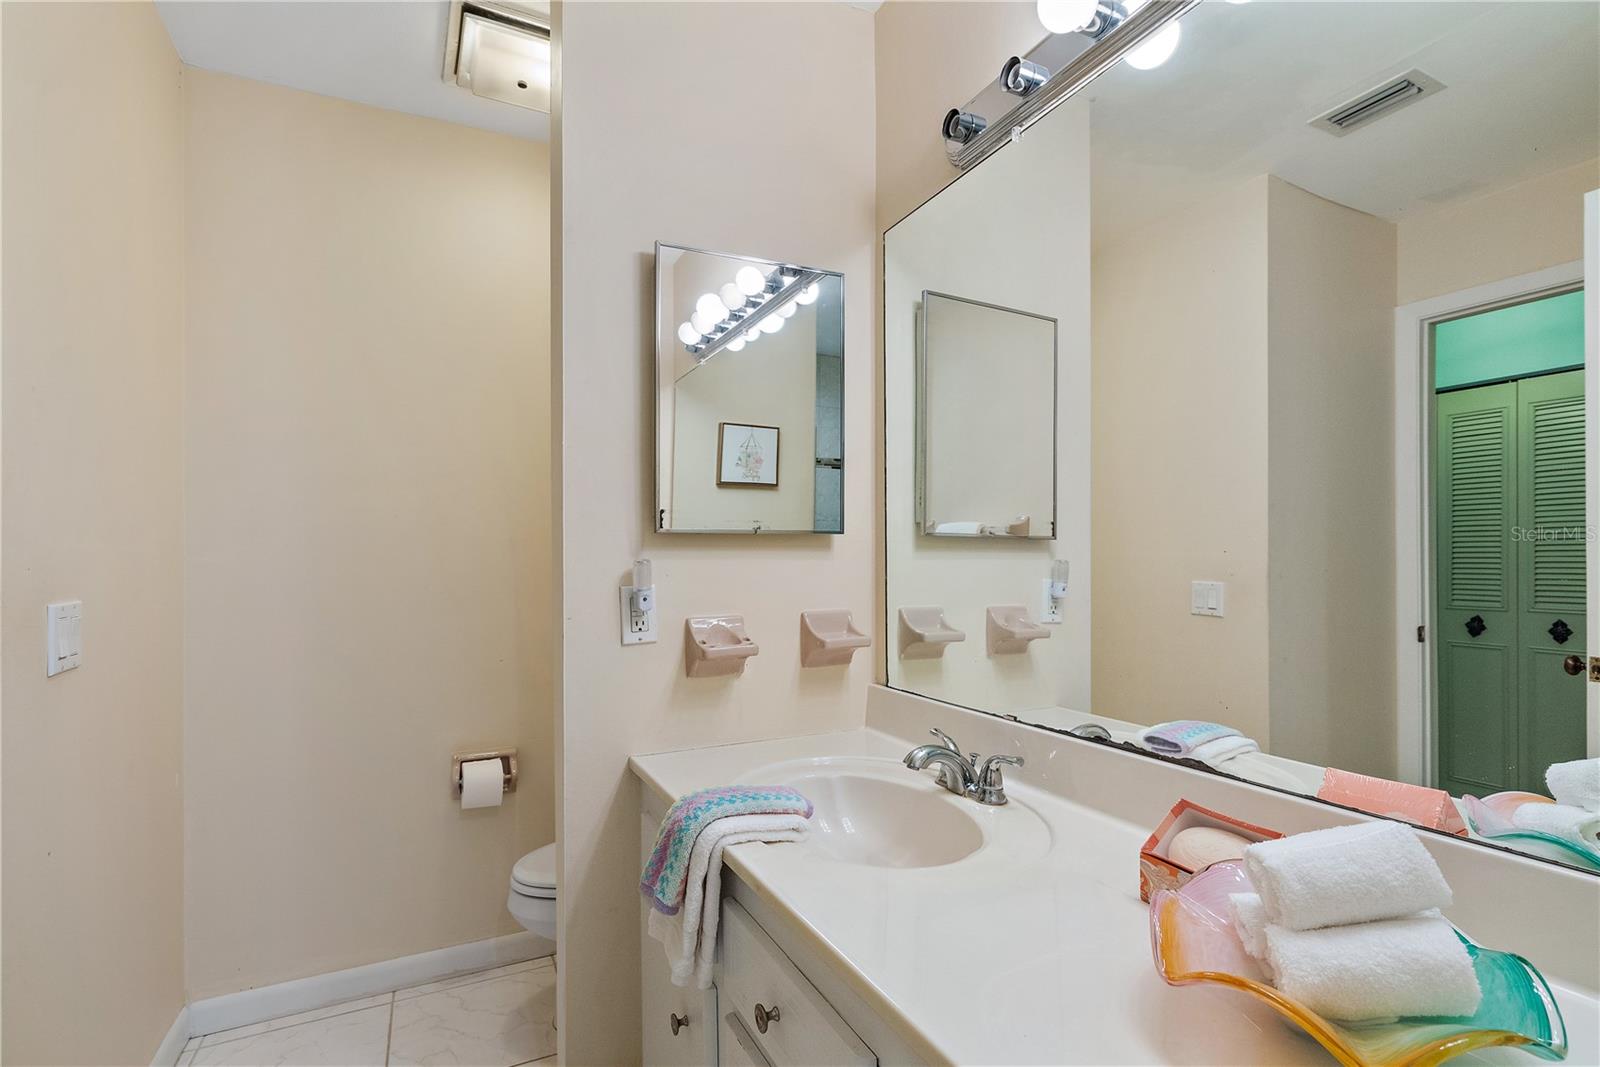 Divided space between vanity and water closet